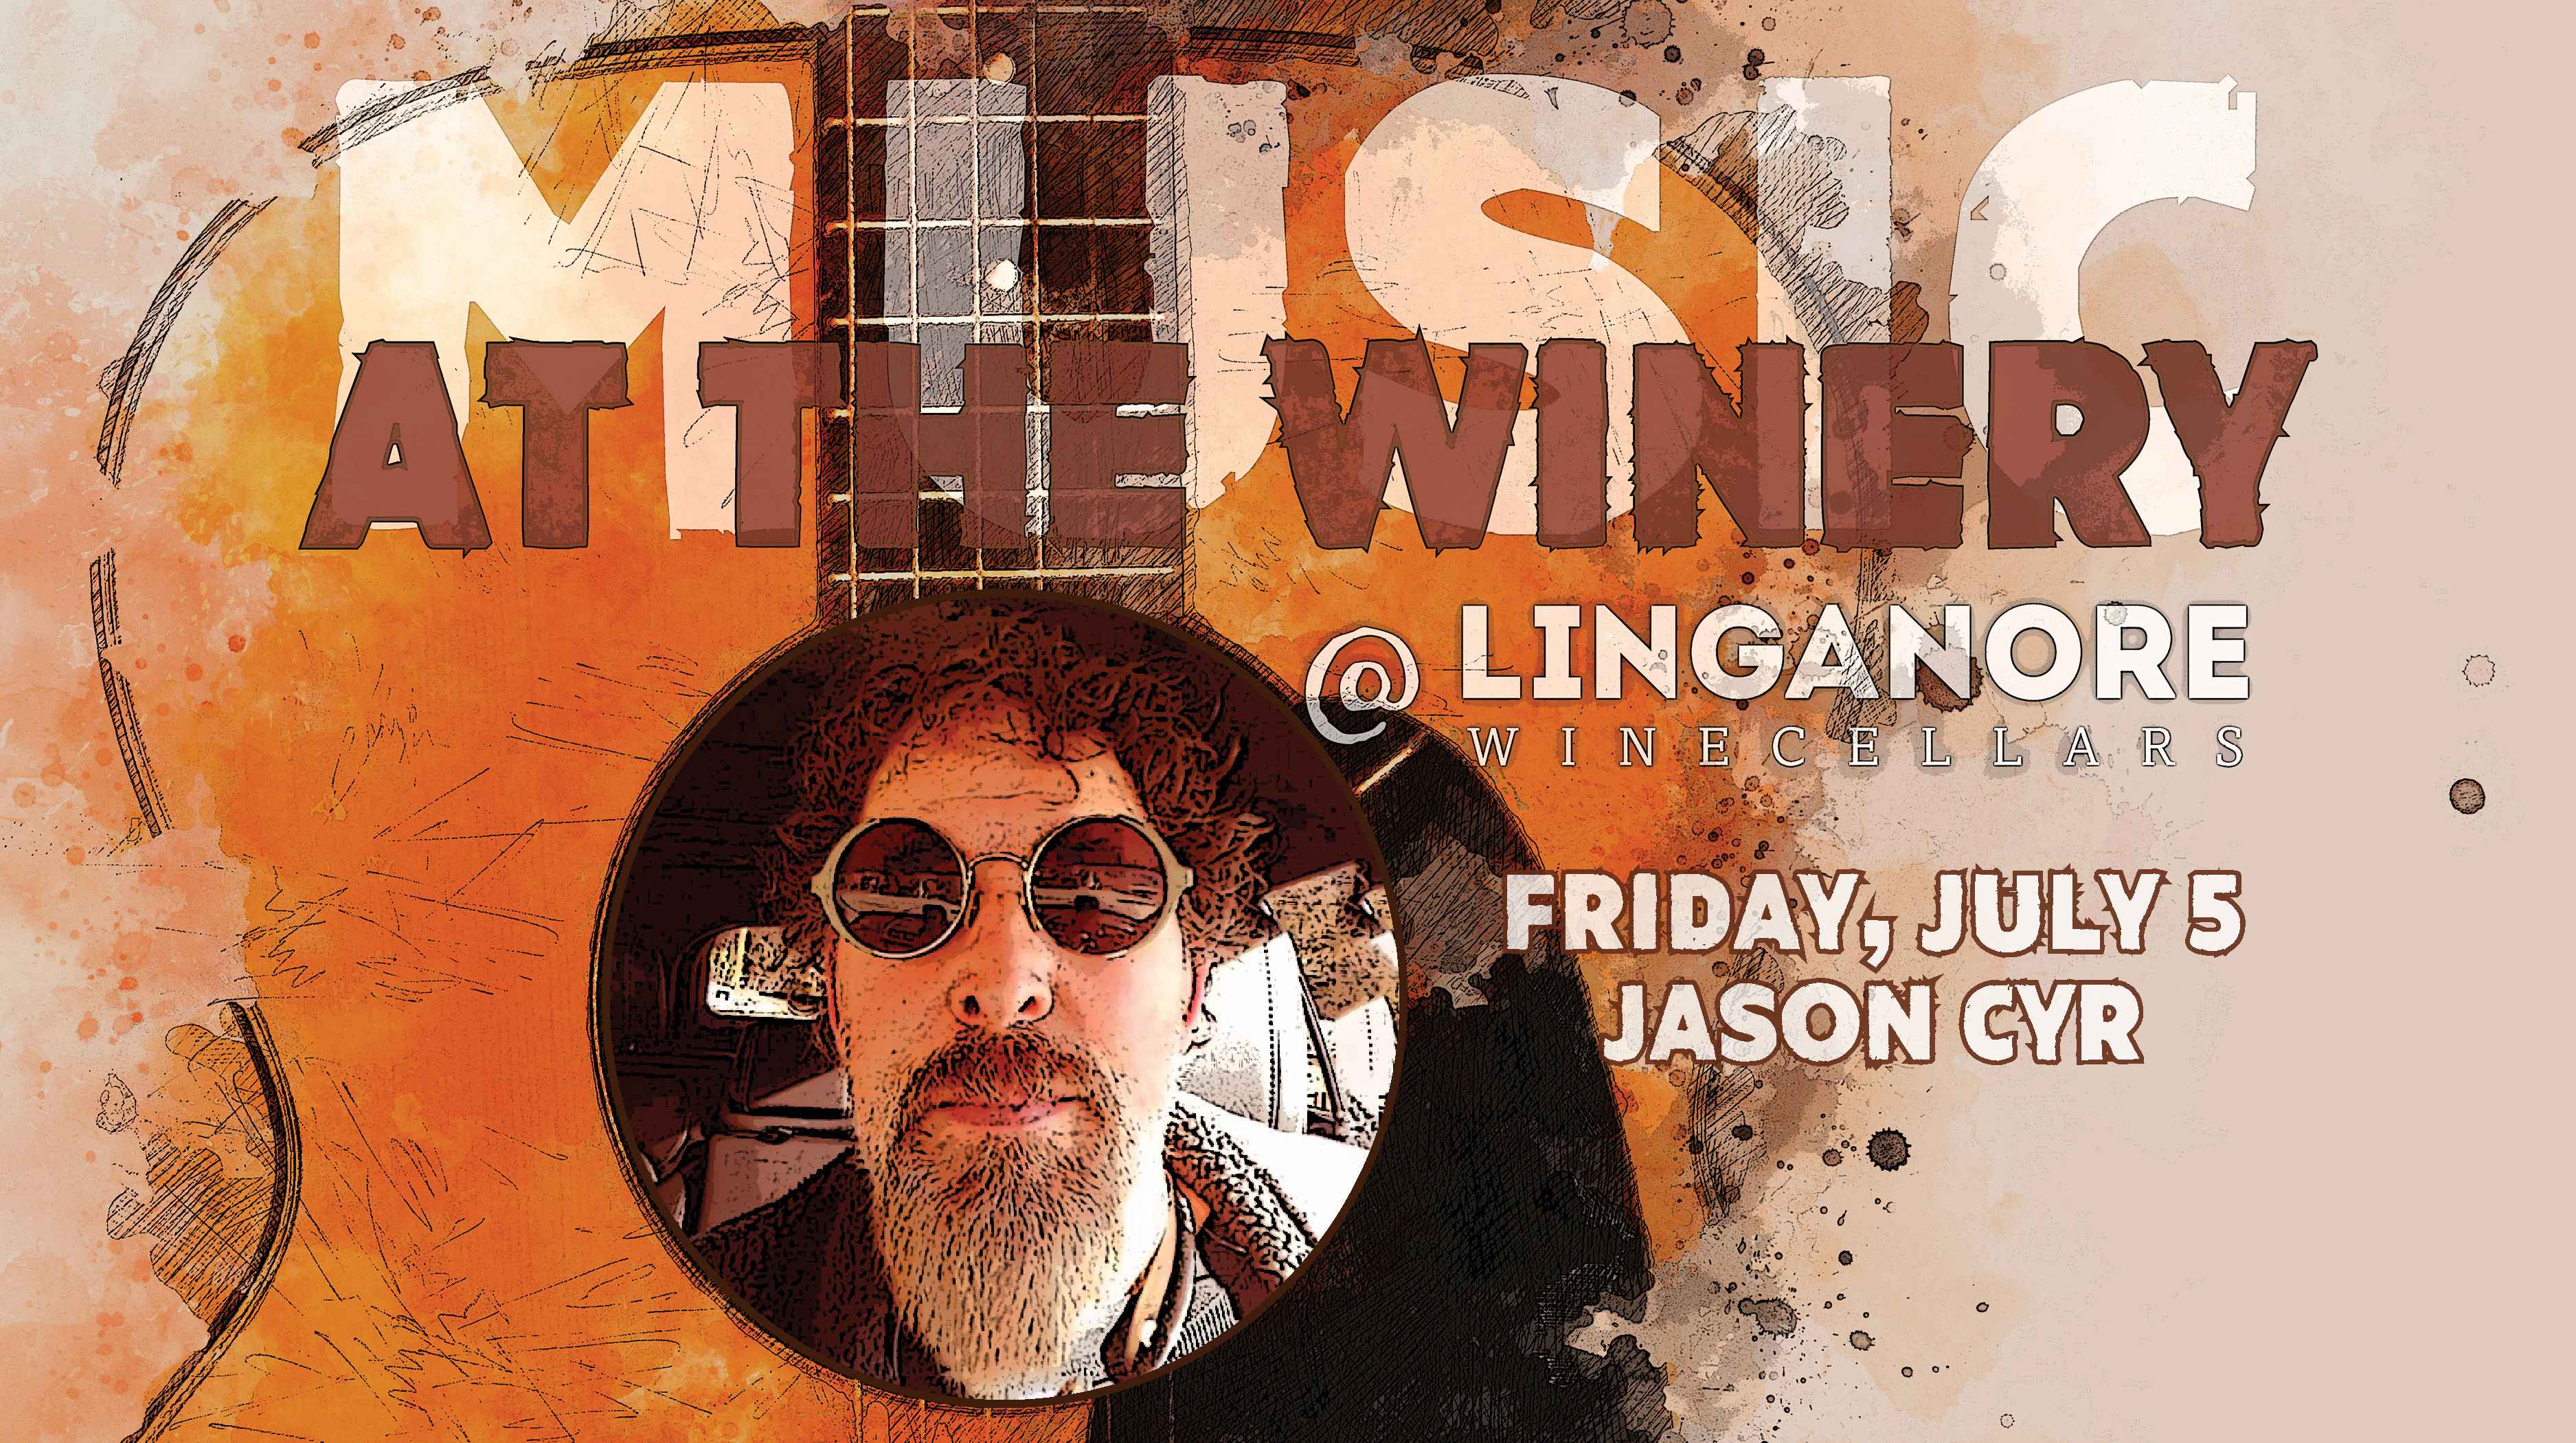 Music at the winery Friday July 5th is Jason Cyr